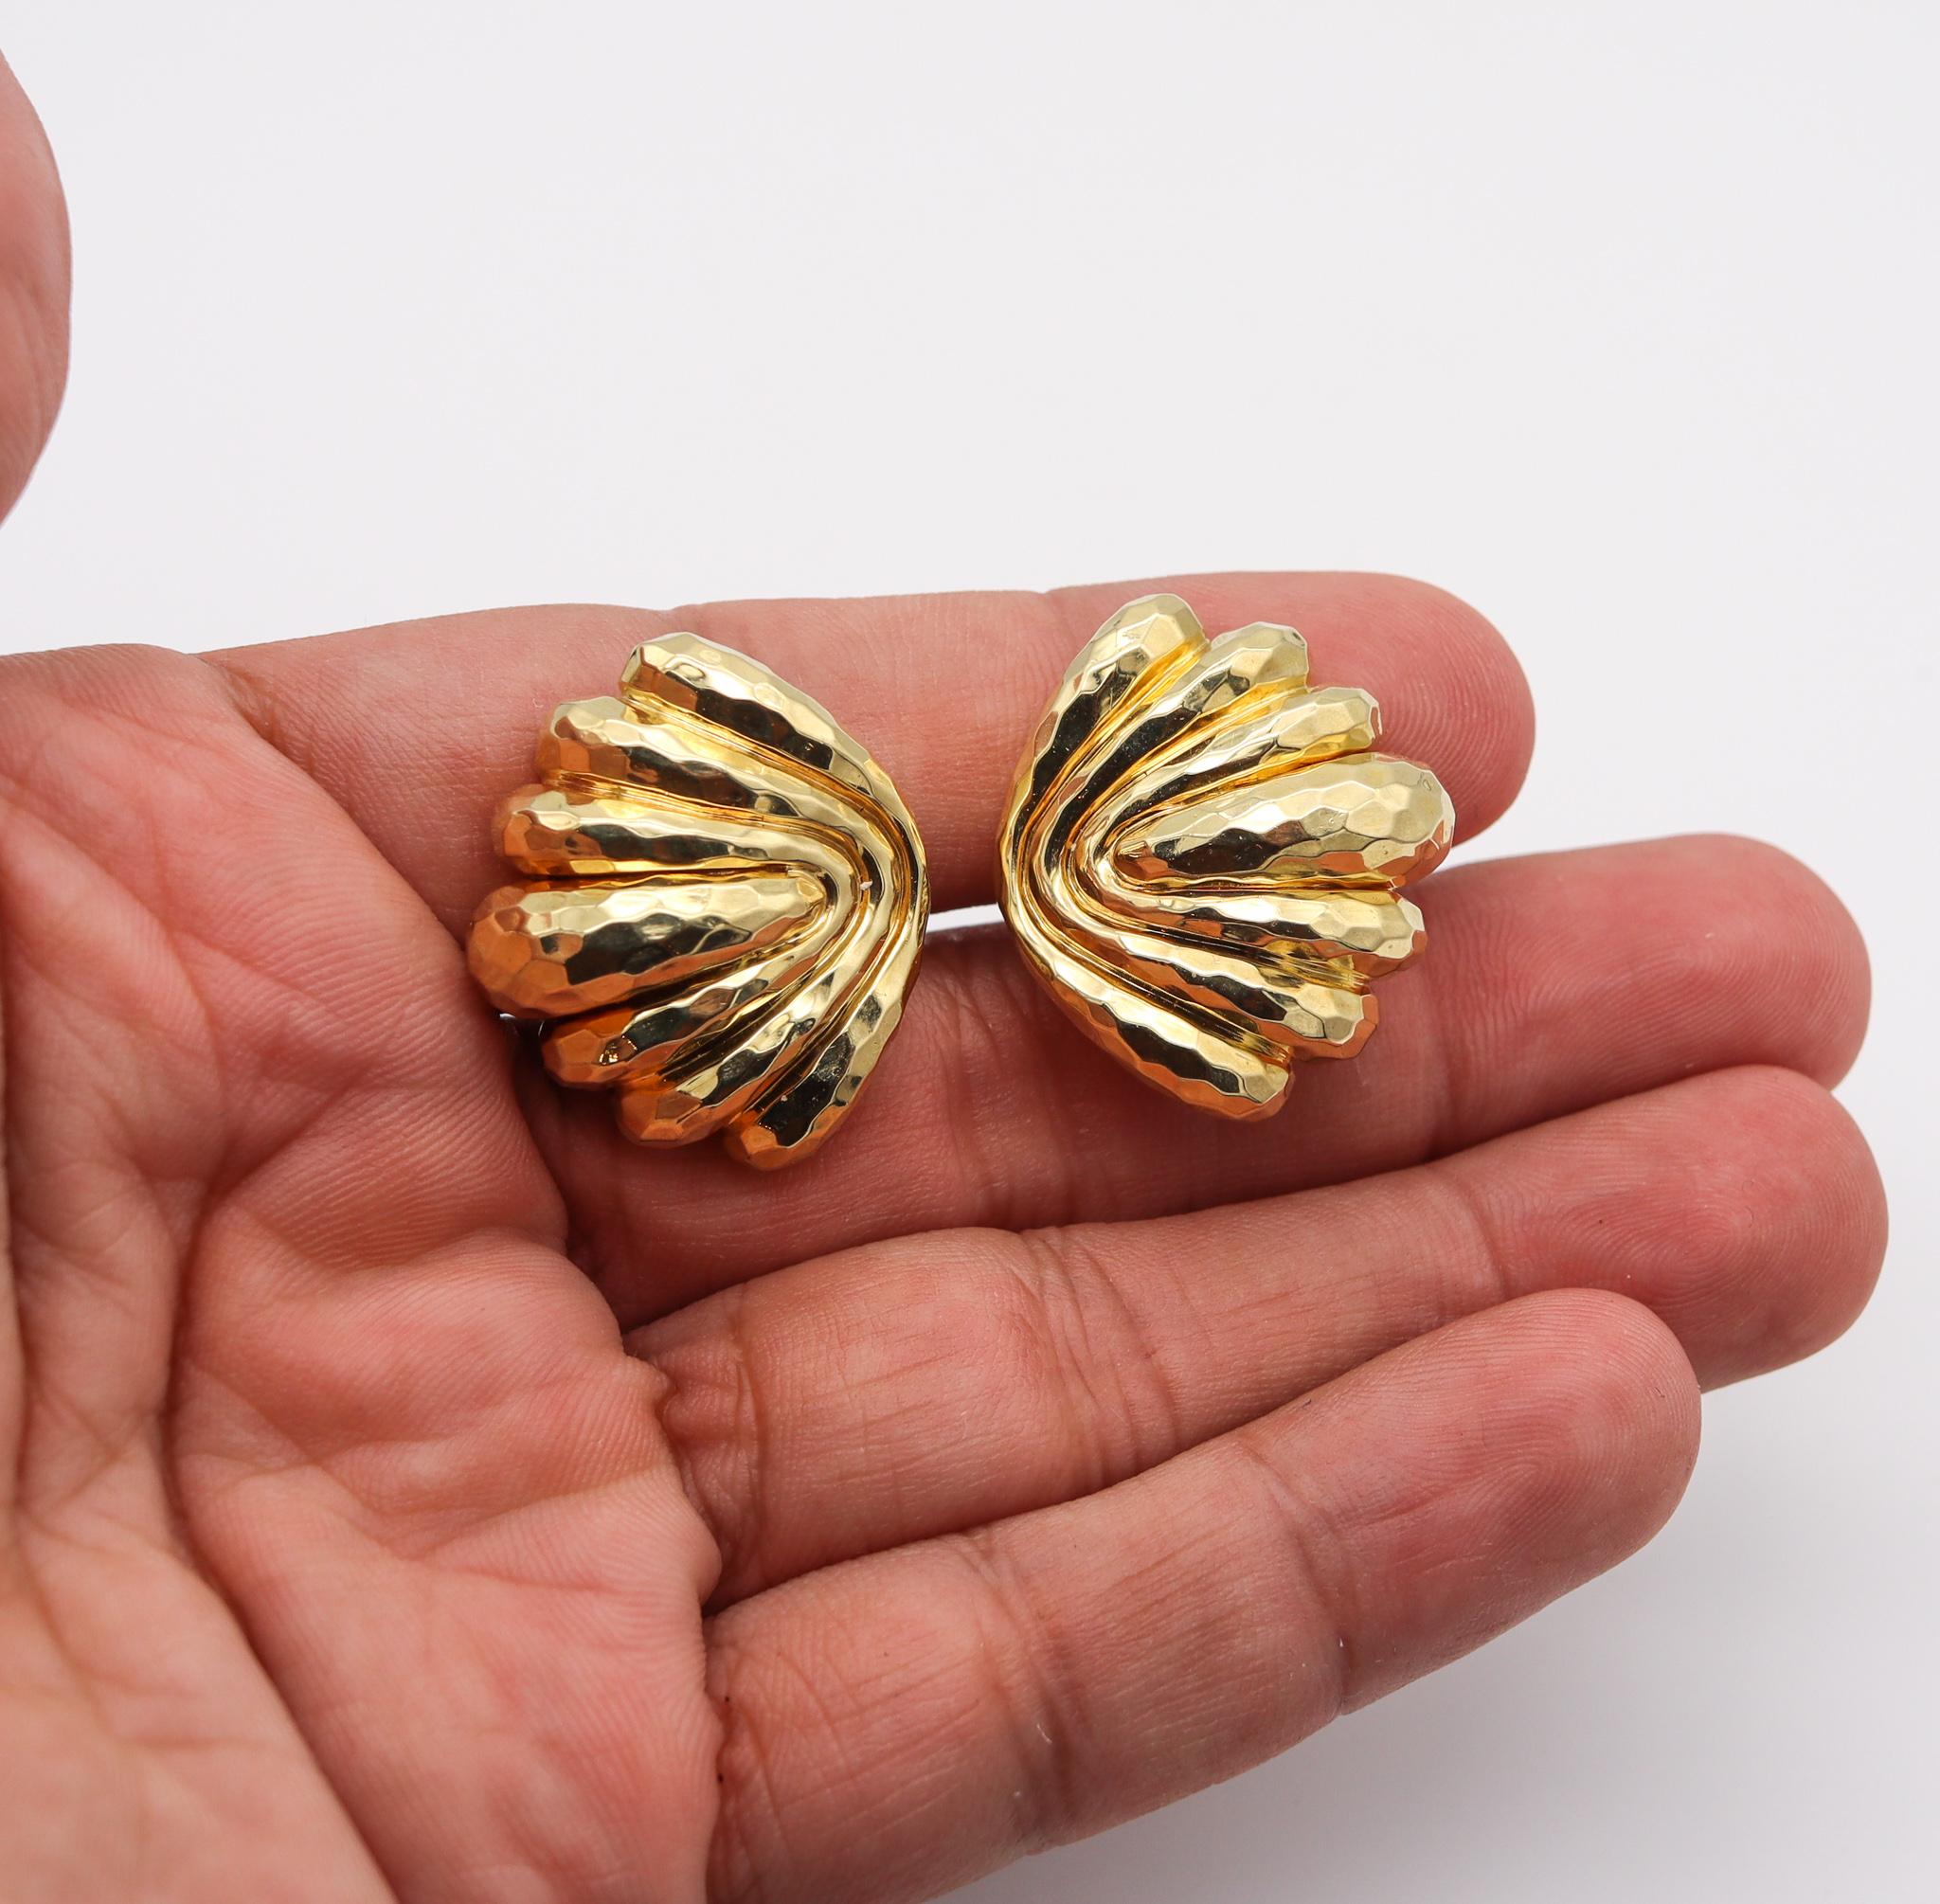 Henry Dunay New York Faceted Hammered Clips on Earrings in Textured 18Kt Gold In Excellent Condition For Sale In Miami, FL